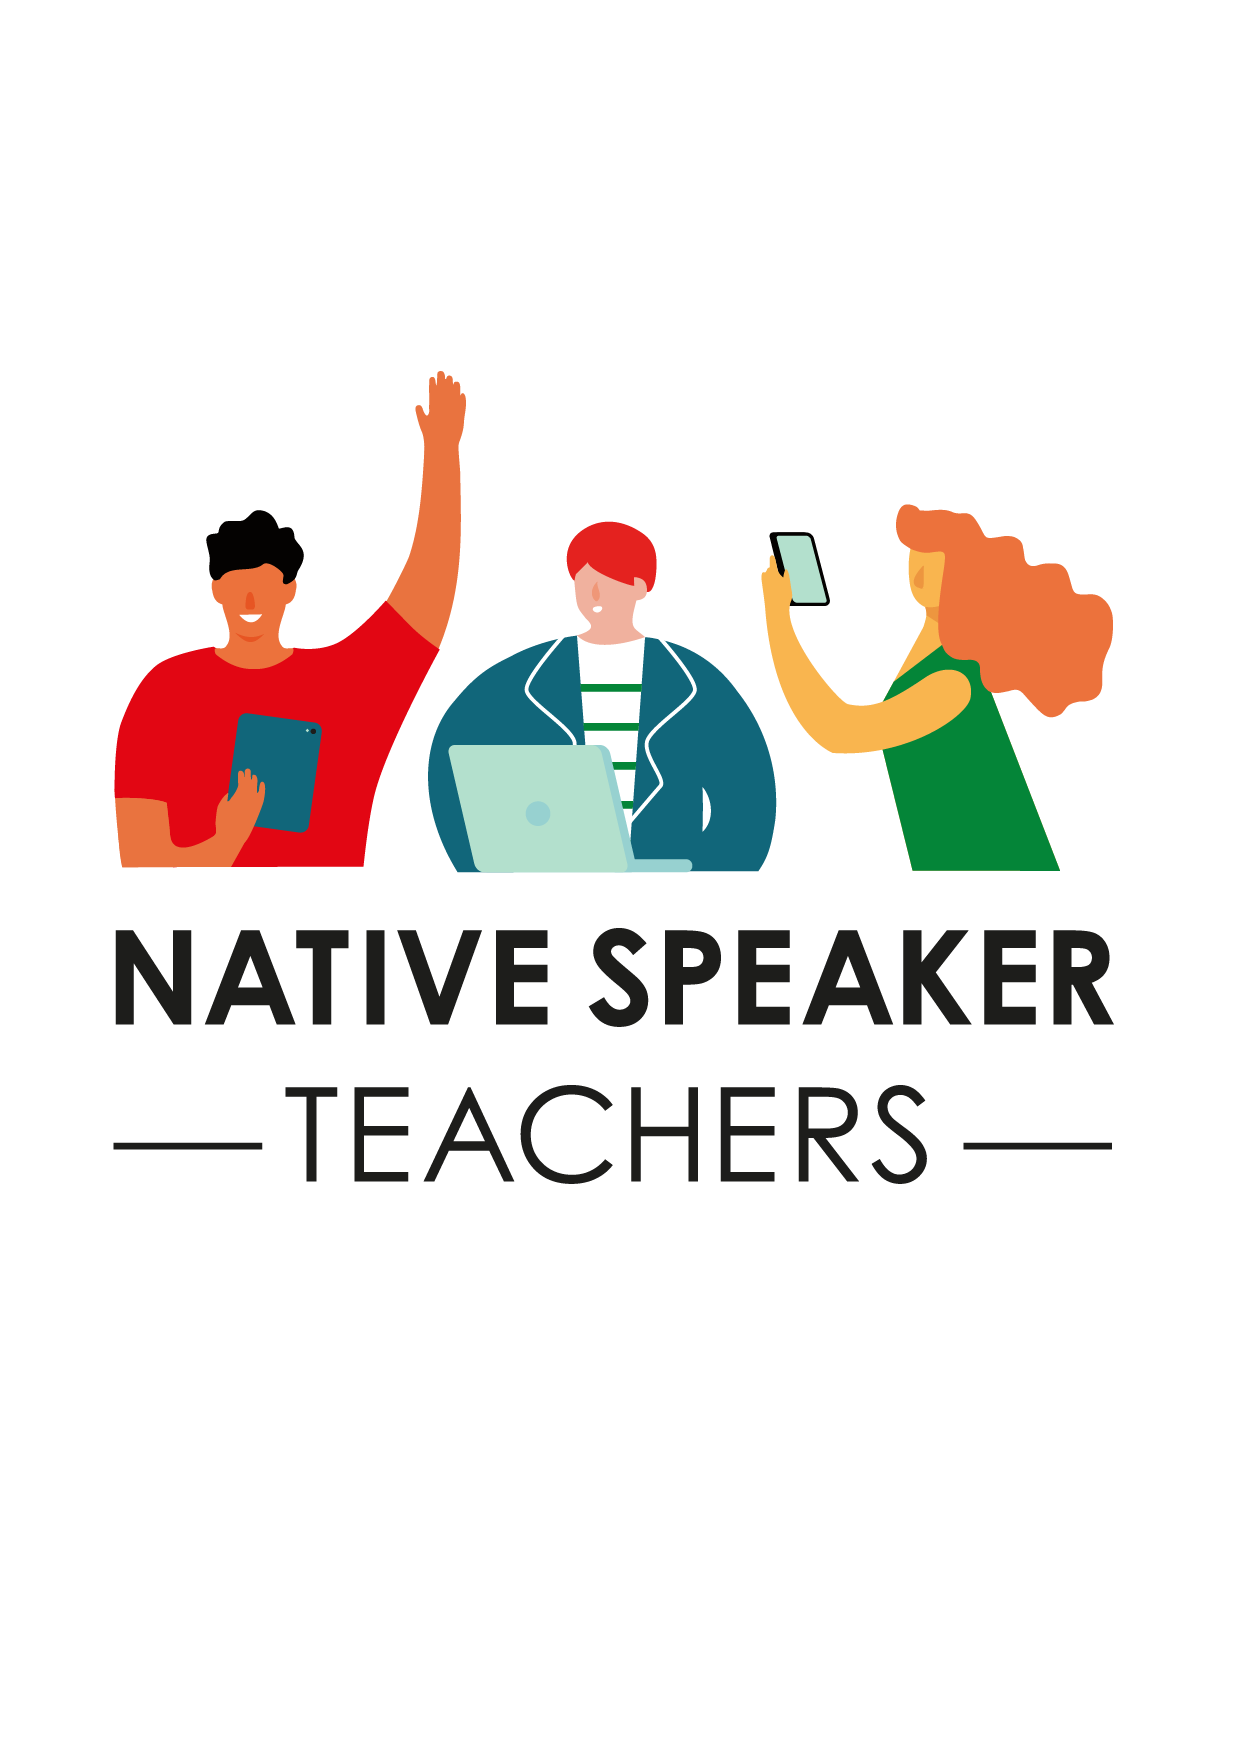 Logo of NativeSpeakerTeachers.com, one-to-one French lessons on Skype or Zoom